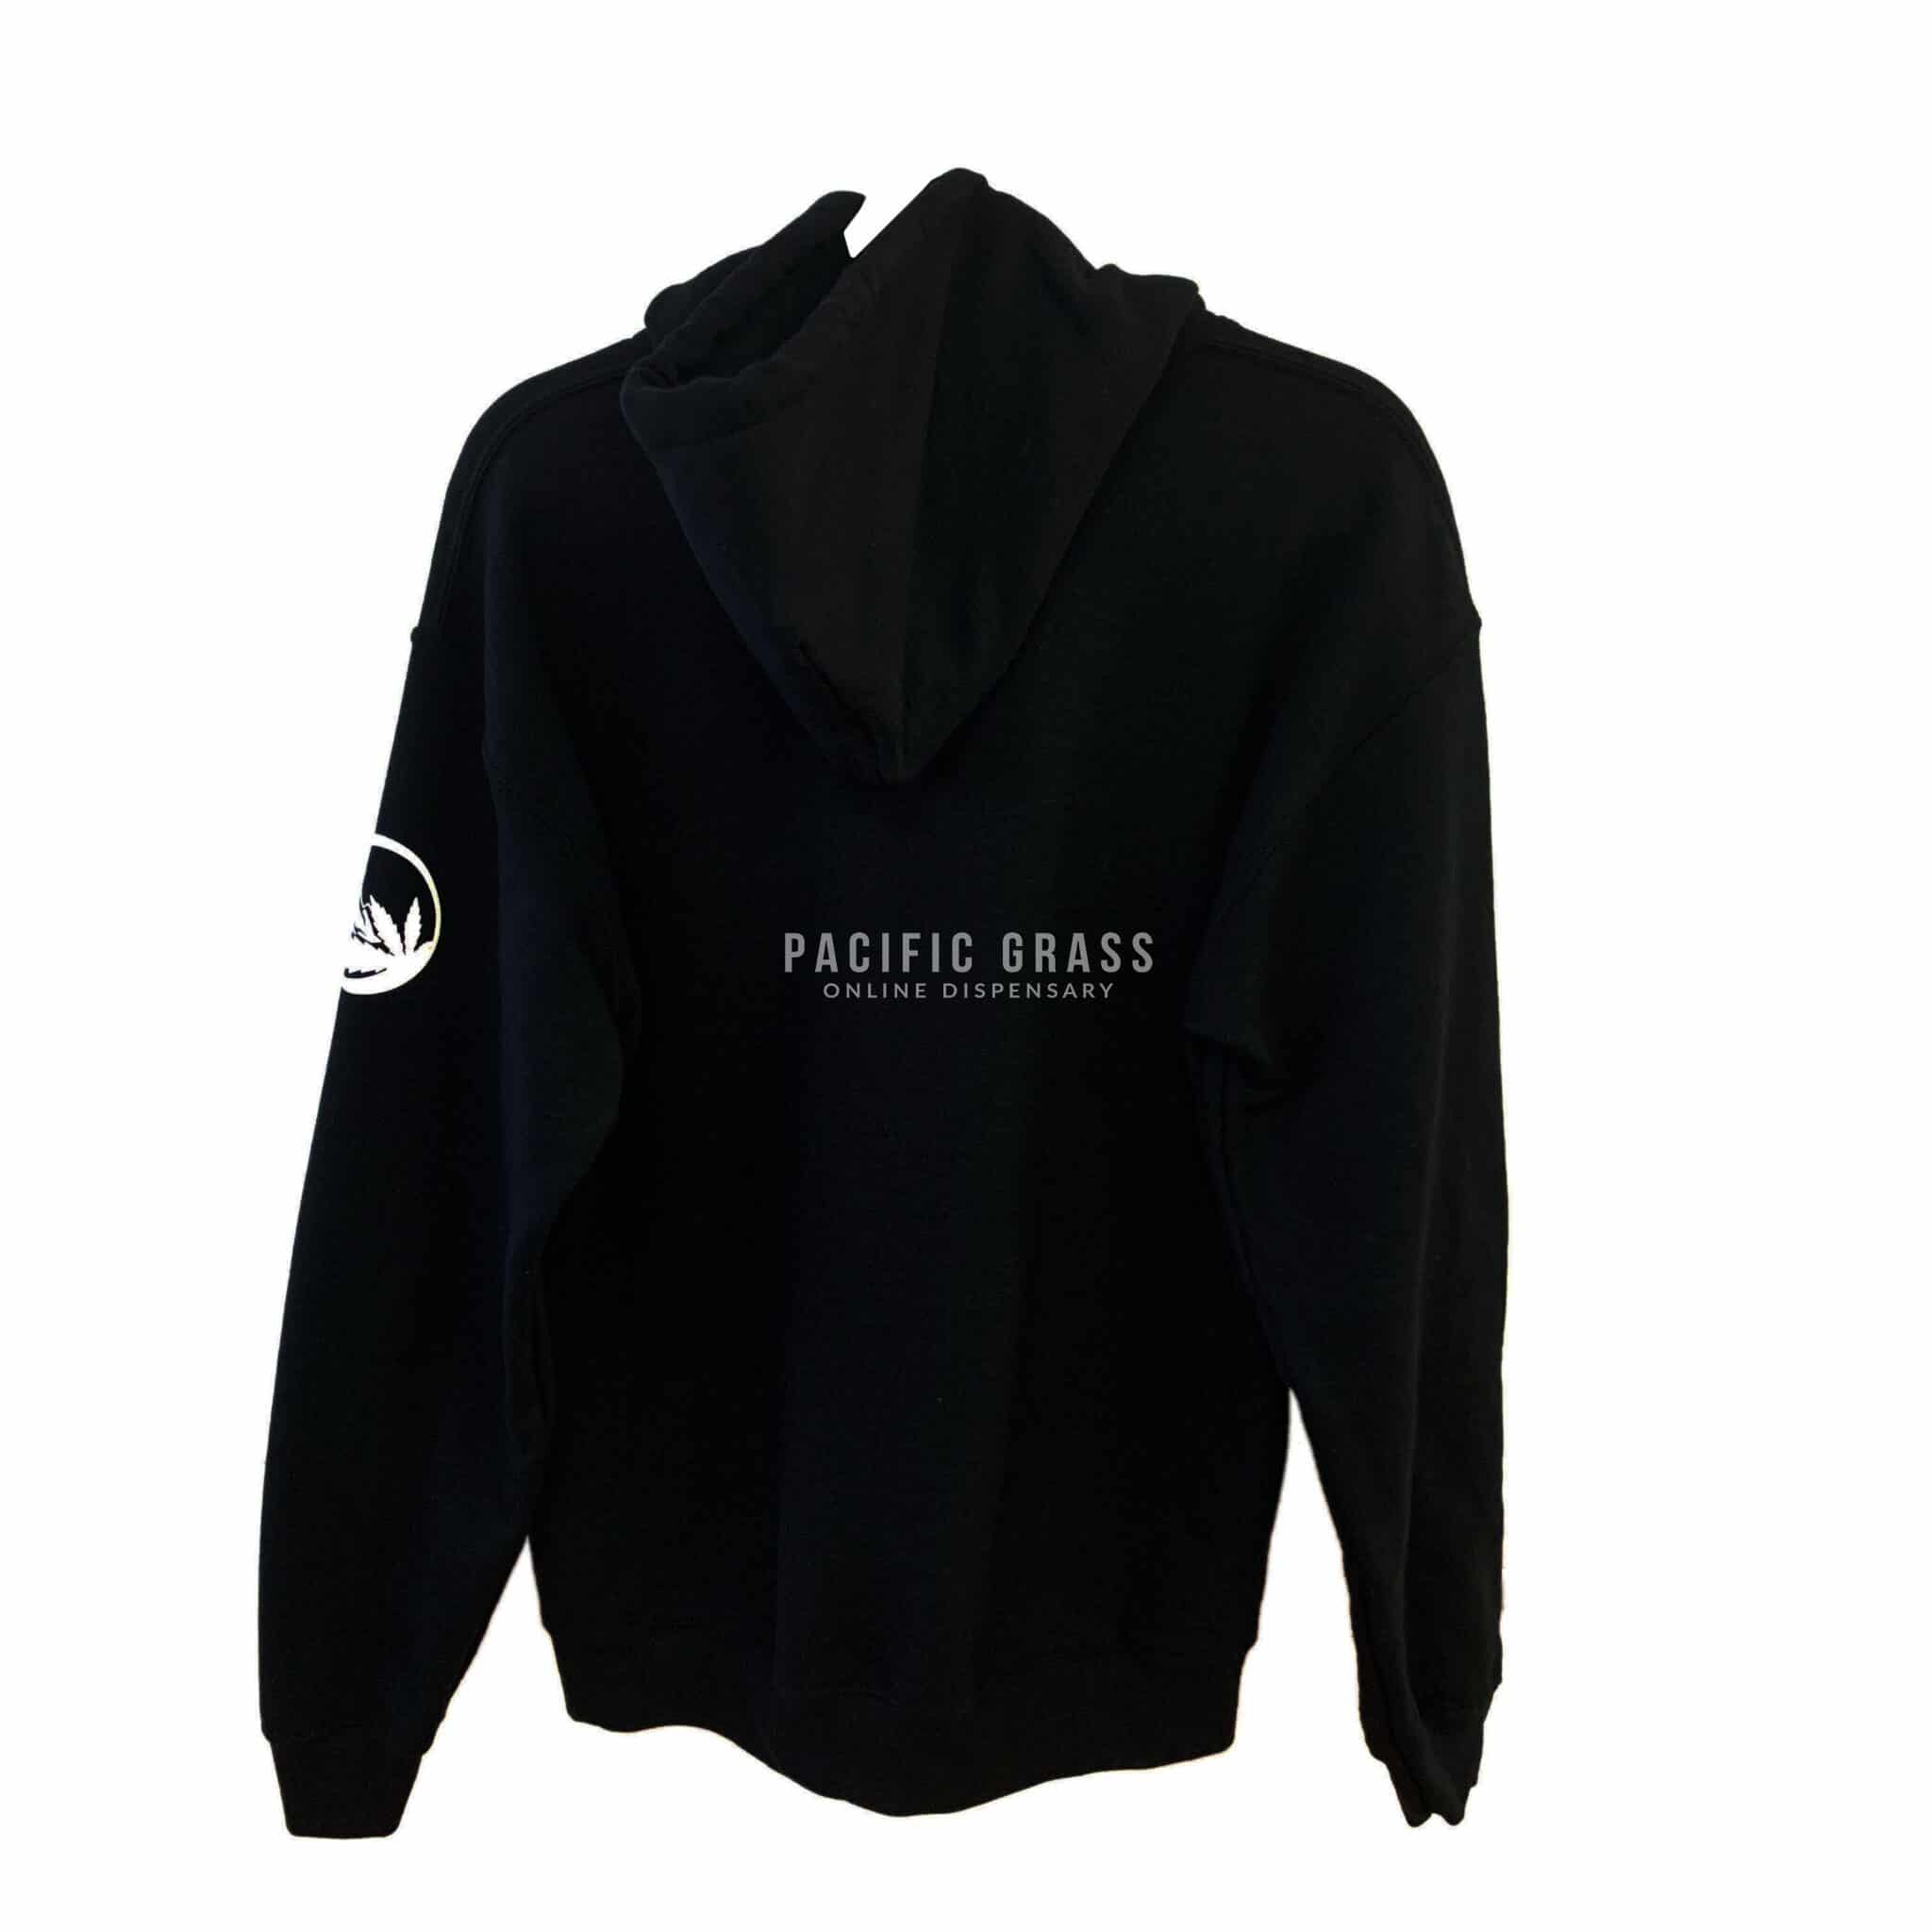 Buy Pacific Grass Hoodie Online In Canada - Pacific Grass